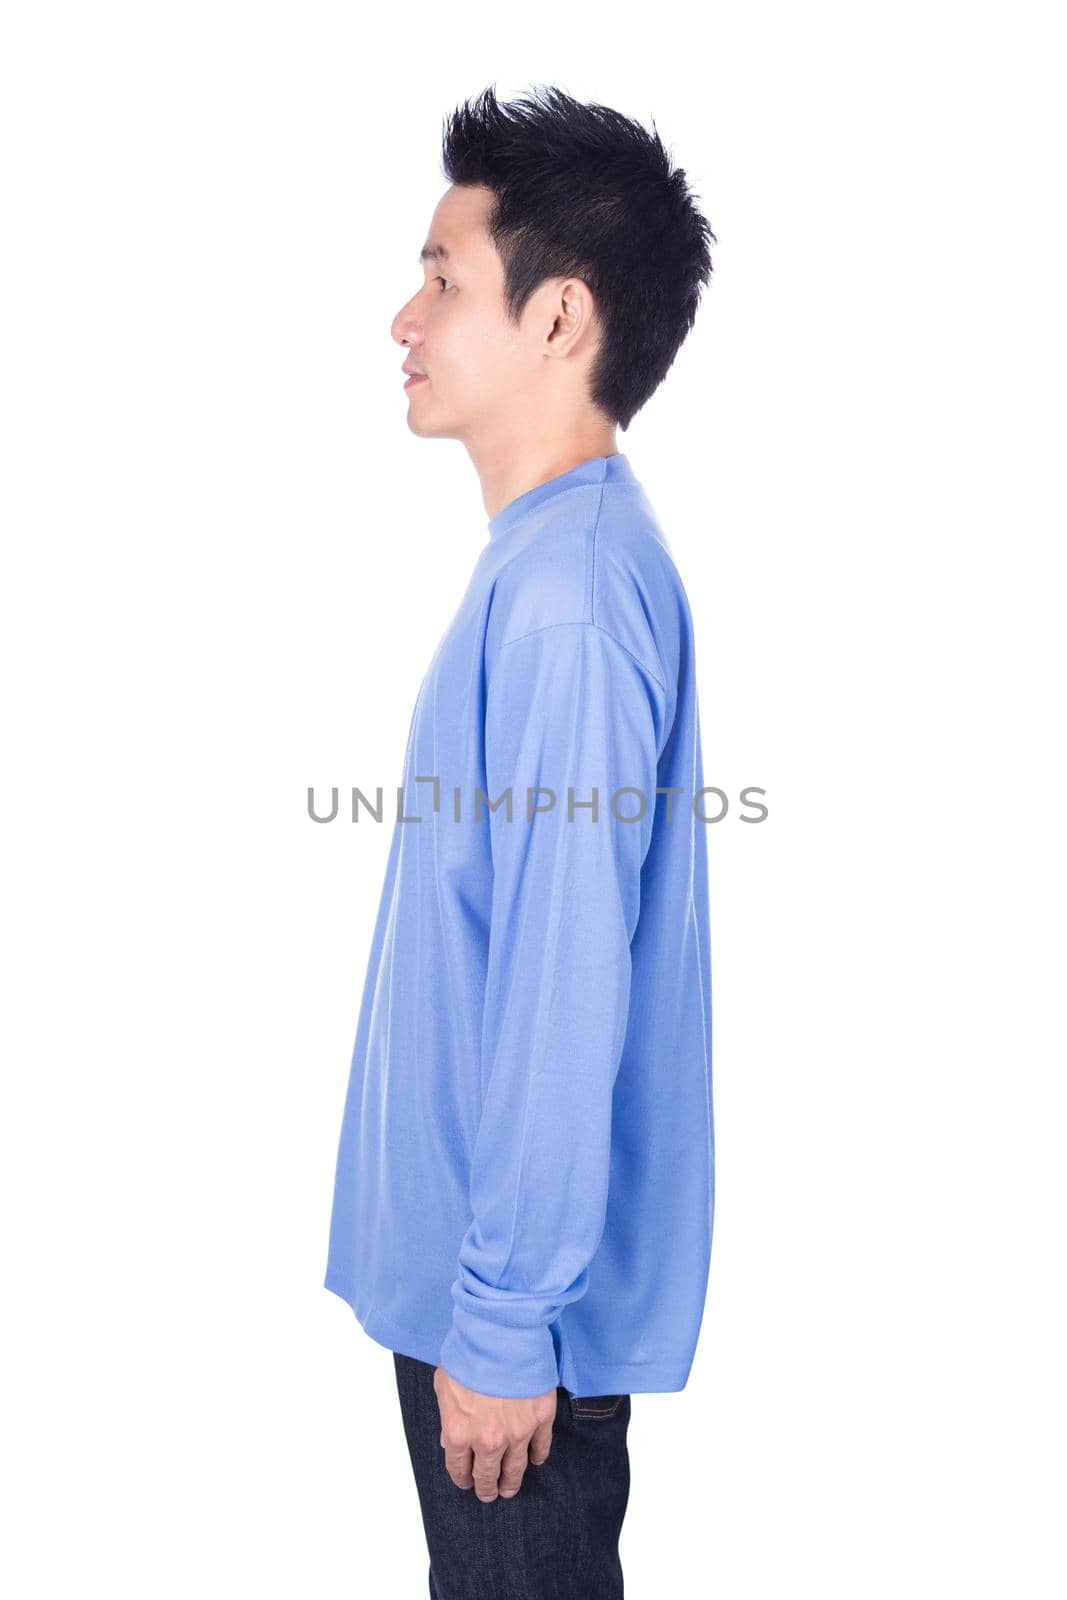 man in blue long sleeve t-shirt isolated on white background (side view) by geargodz